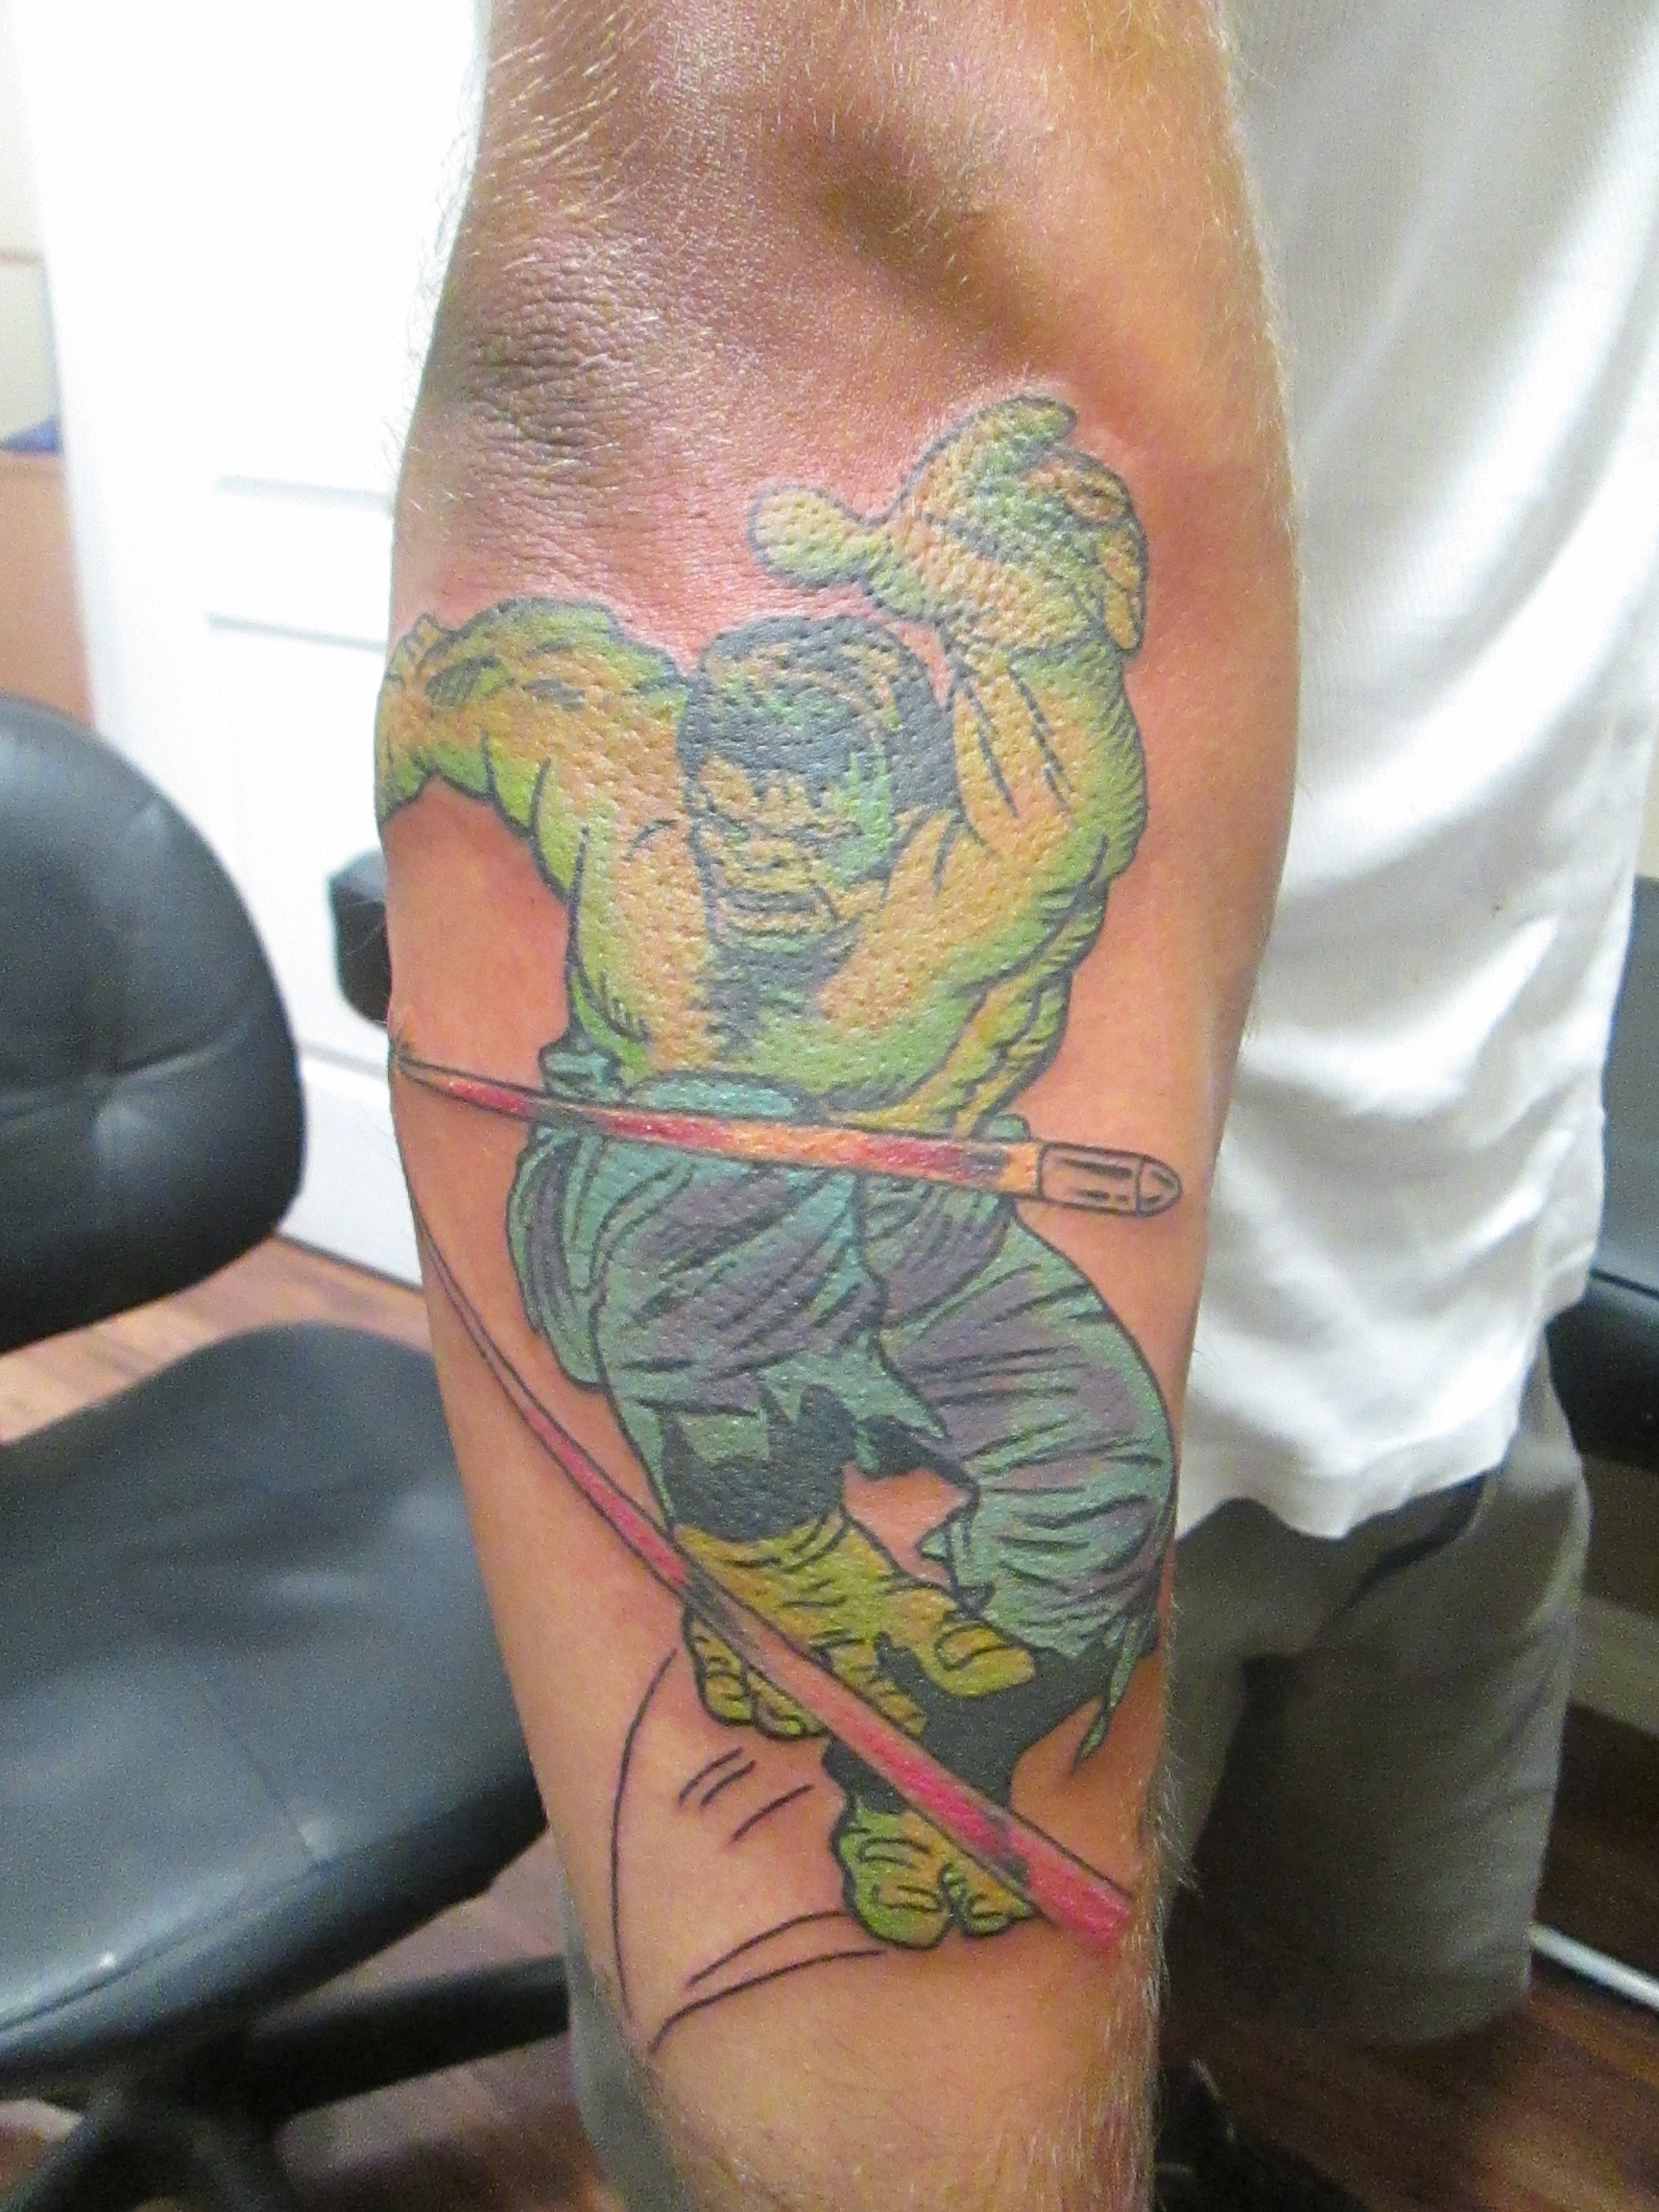 40 Super Cool Superhero Tattoos That Will Blow Your Mind